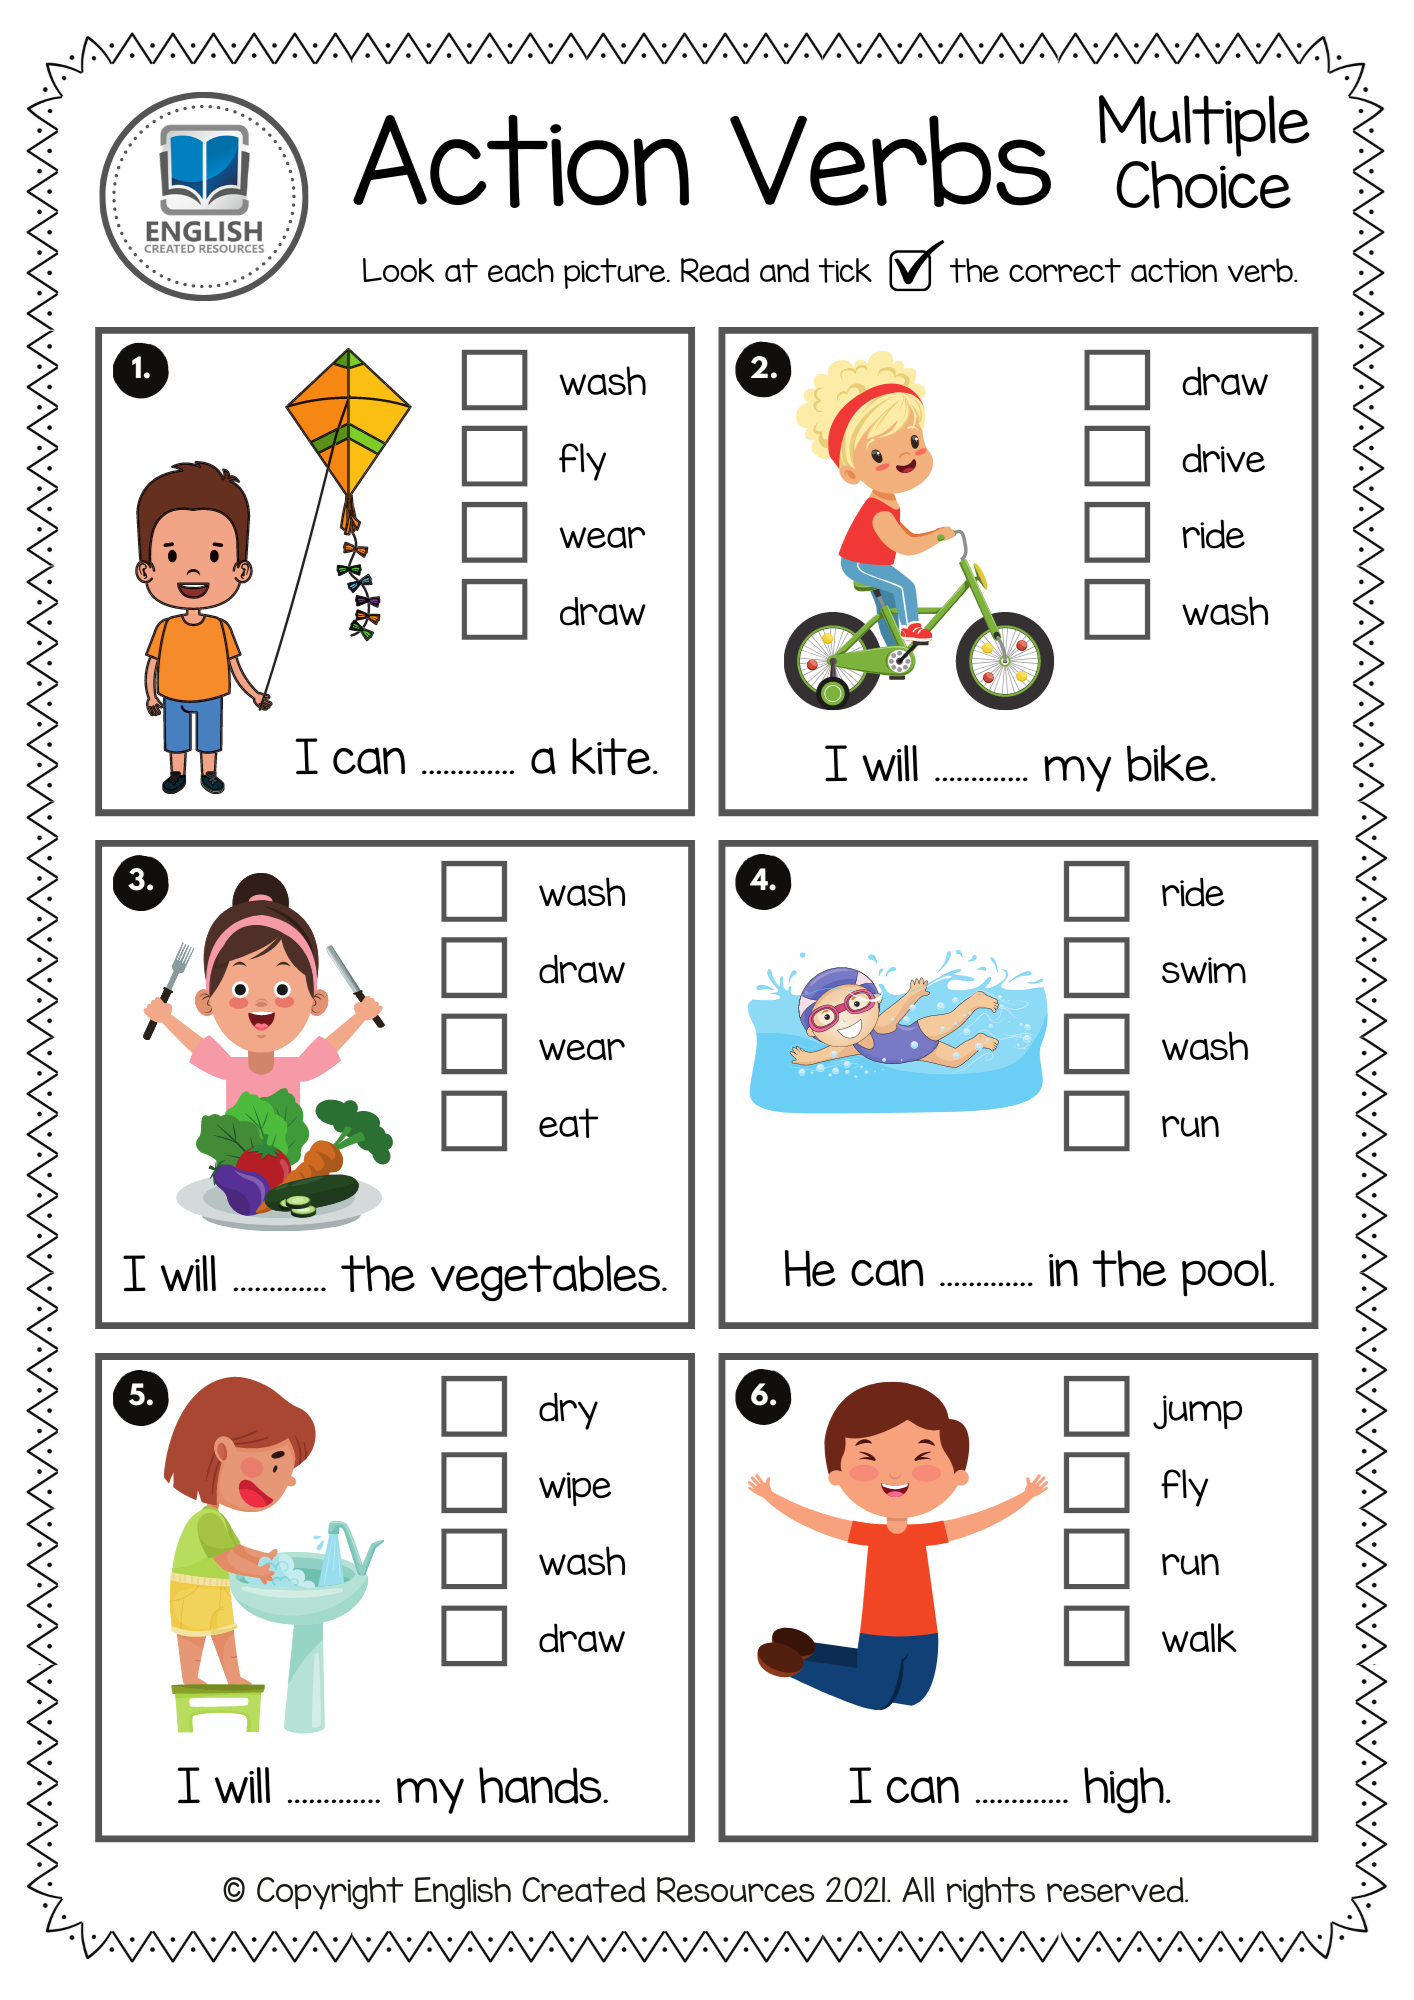 action-verbs-activity-book-english-created-resources